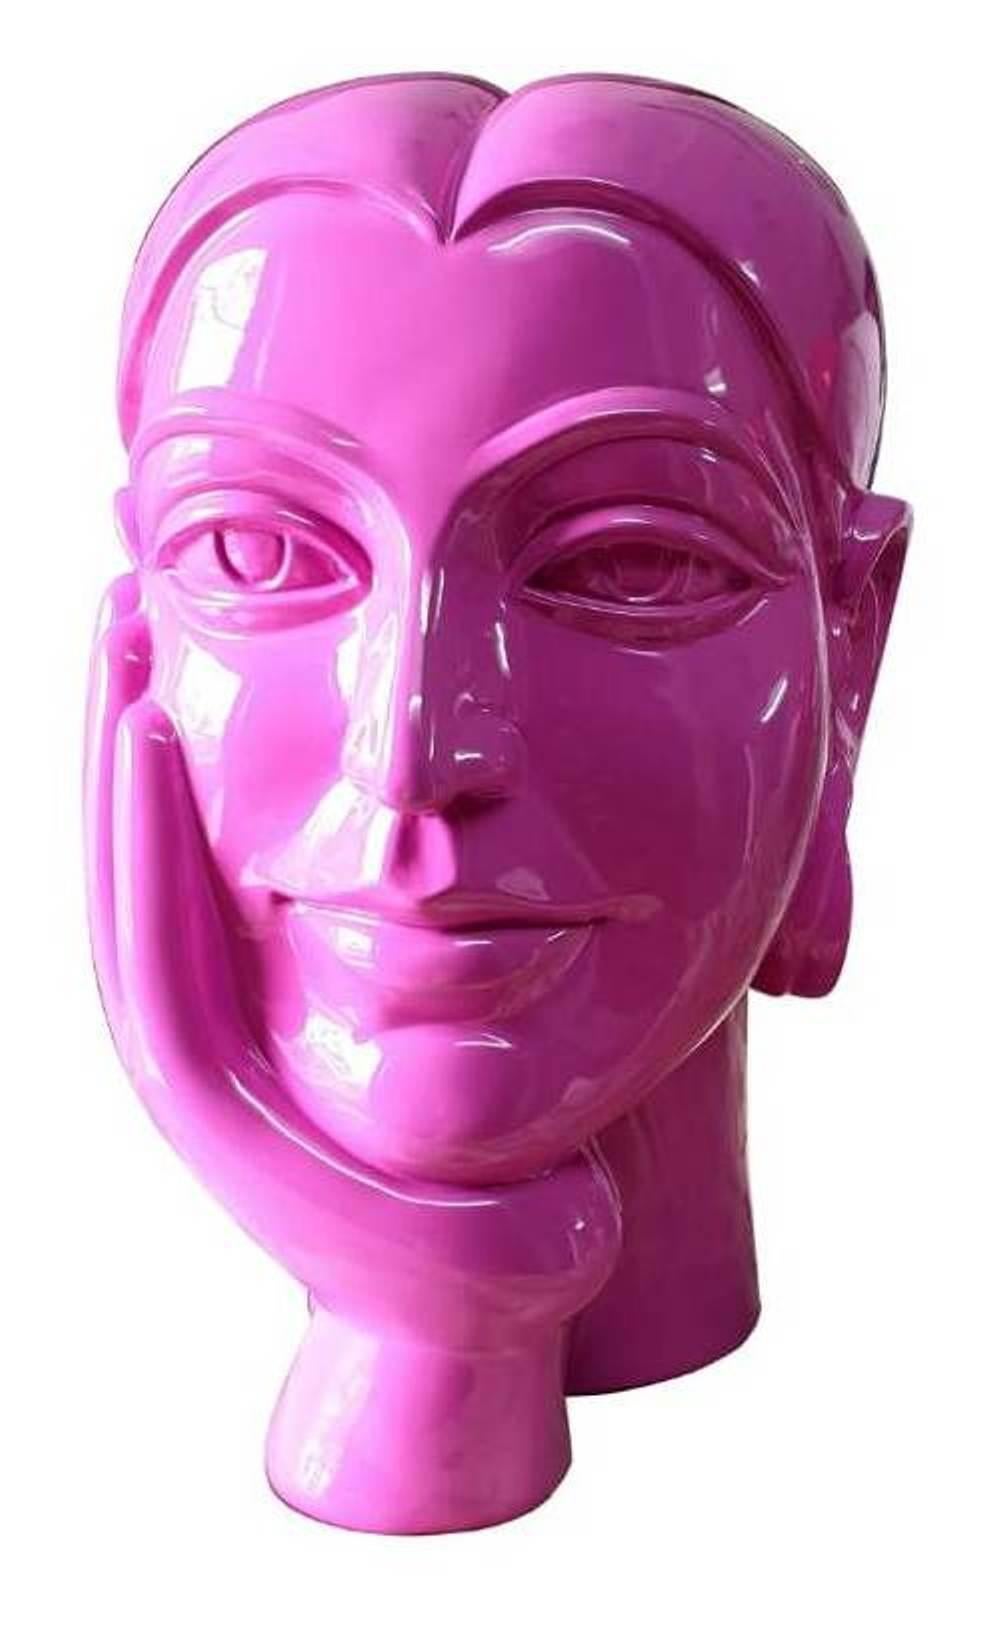 DVS Krishna Figurative Sculpture - Thinking Woman, One Hand on Face, Pink Painted on Fiber Glass "In Stock"